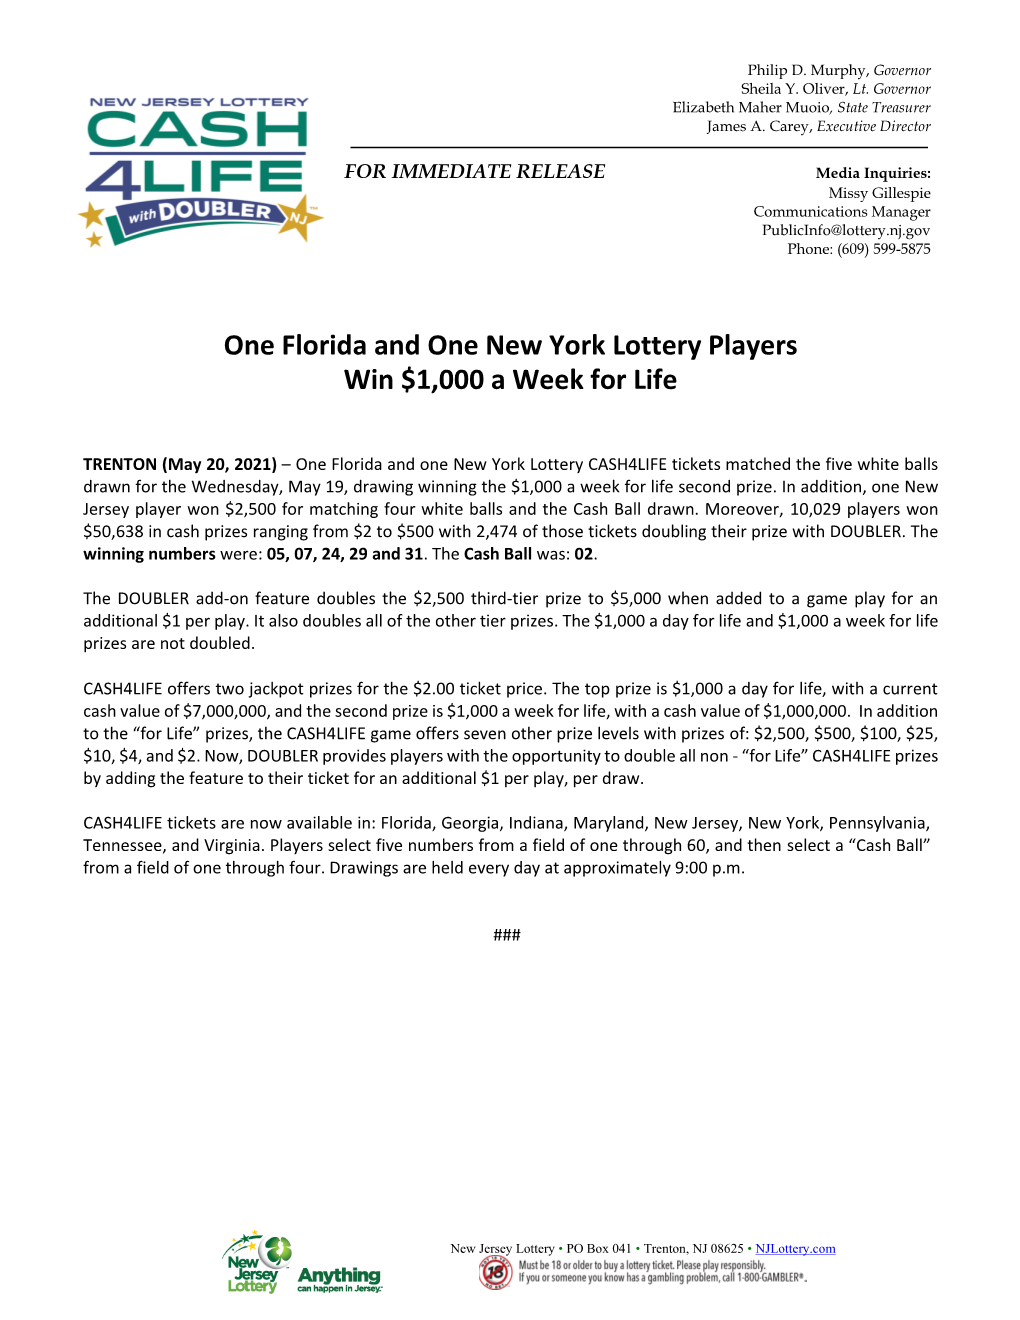 One Florida and One New York Lottery Players Win $1,000 a Week for Life